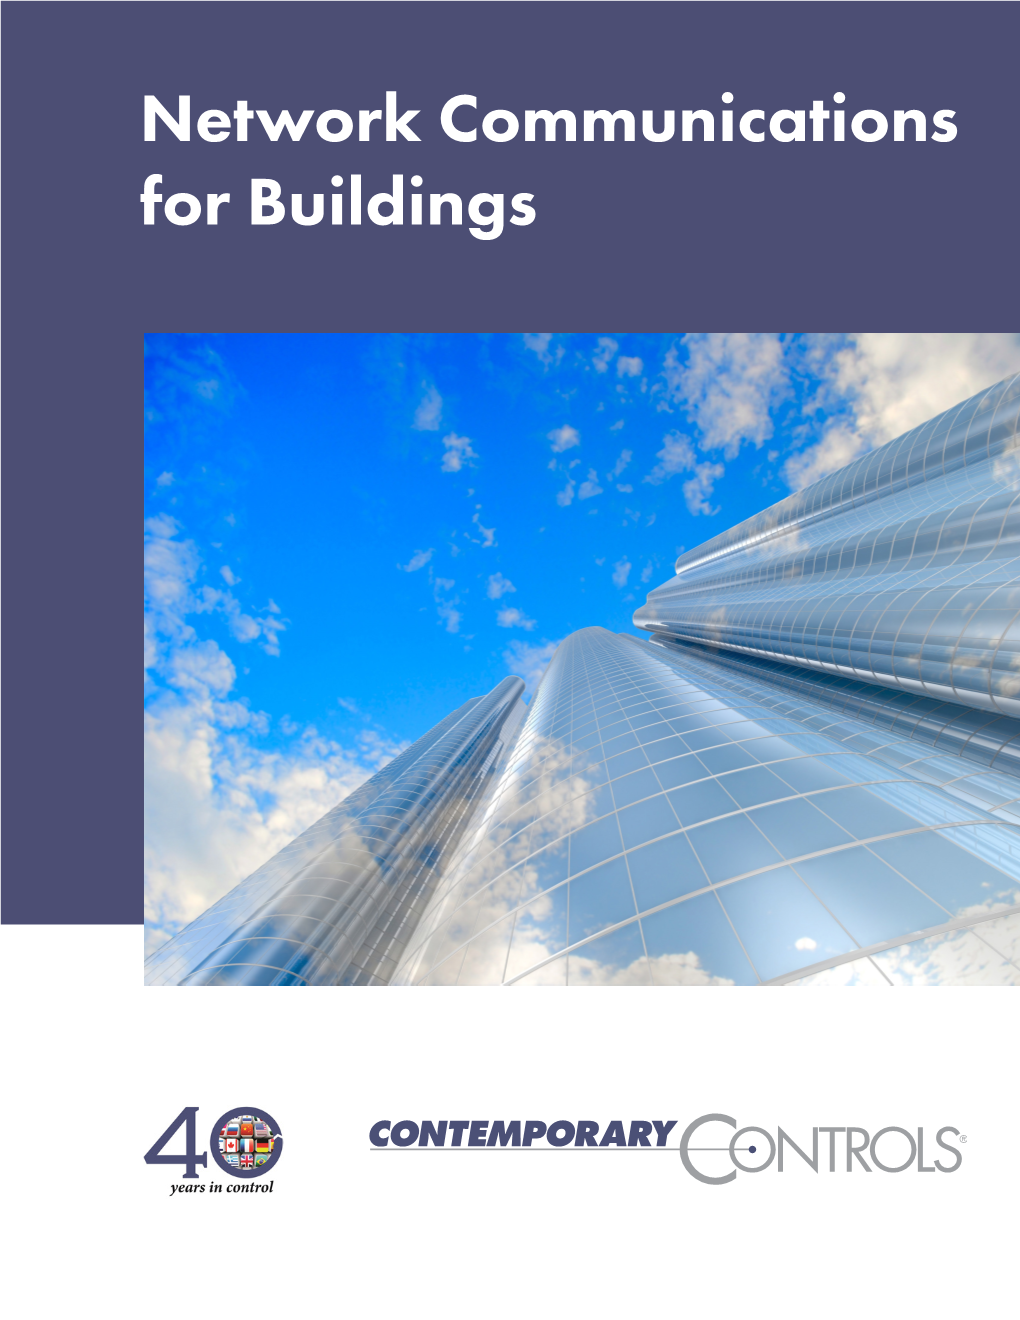 Network Communications for Buildings